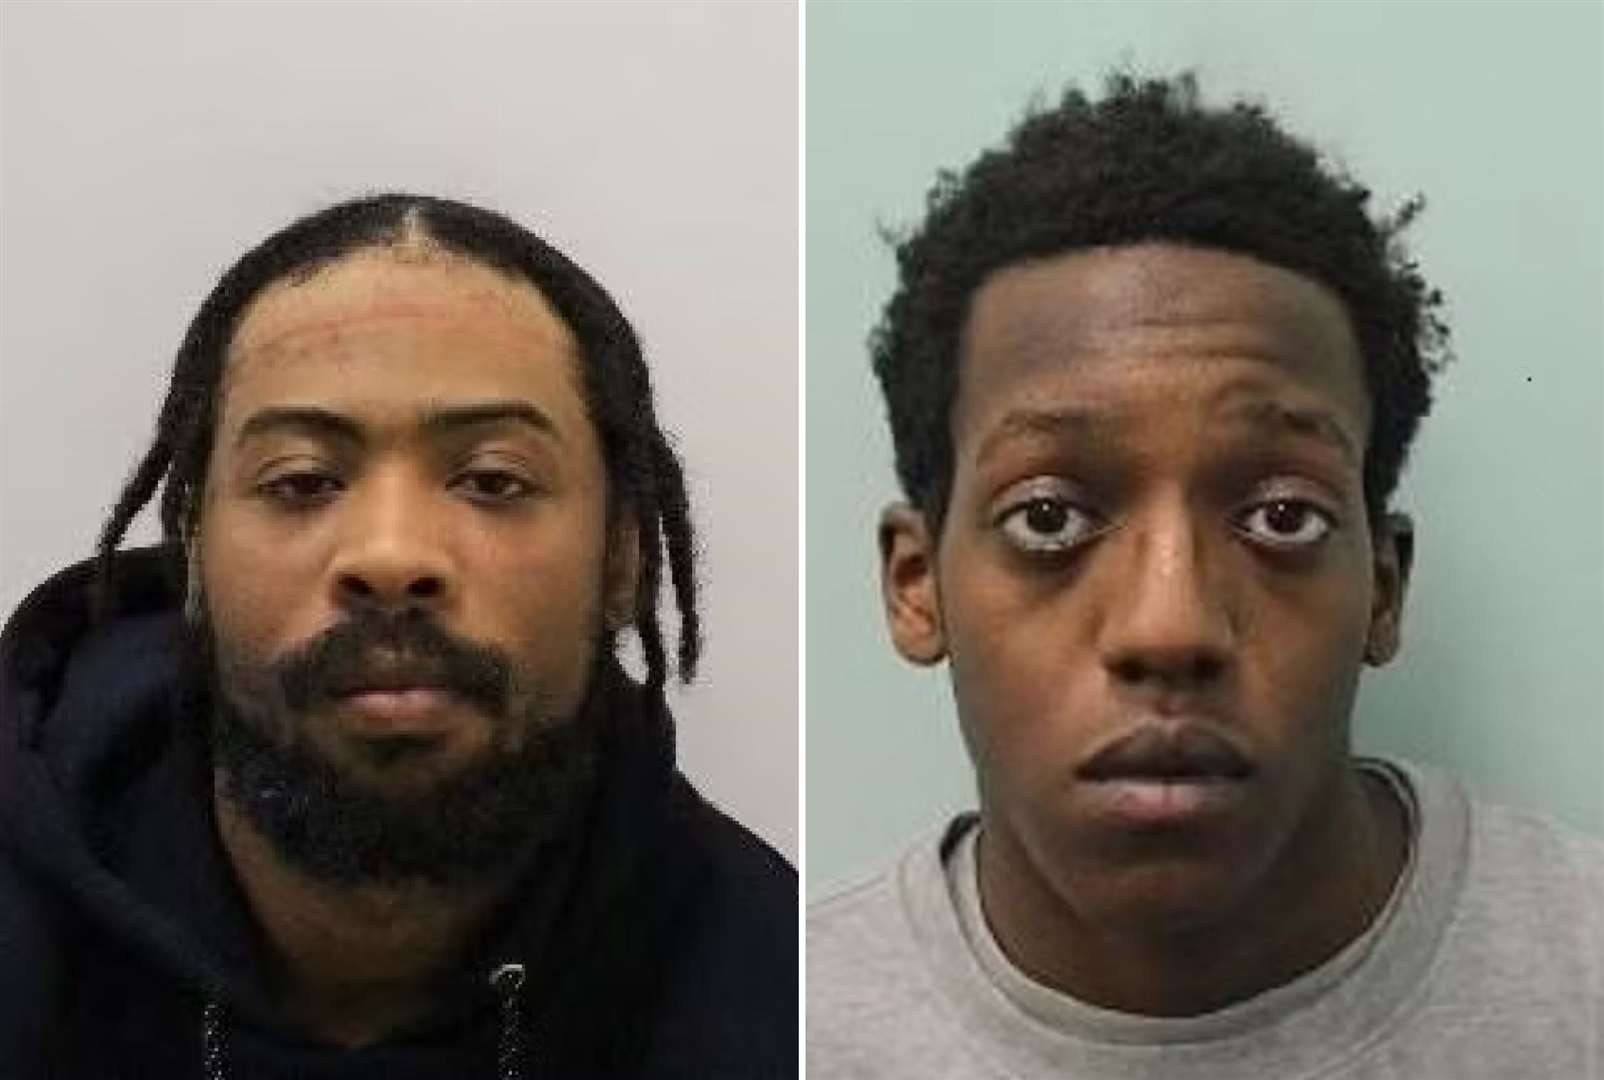 Jahoe Allen, 34, of Kings Road, UB8, and Ayyub Kigoz, 19, of Salop Road were also found guilty of the London Murder. Picture: Metropolitan Police